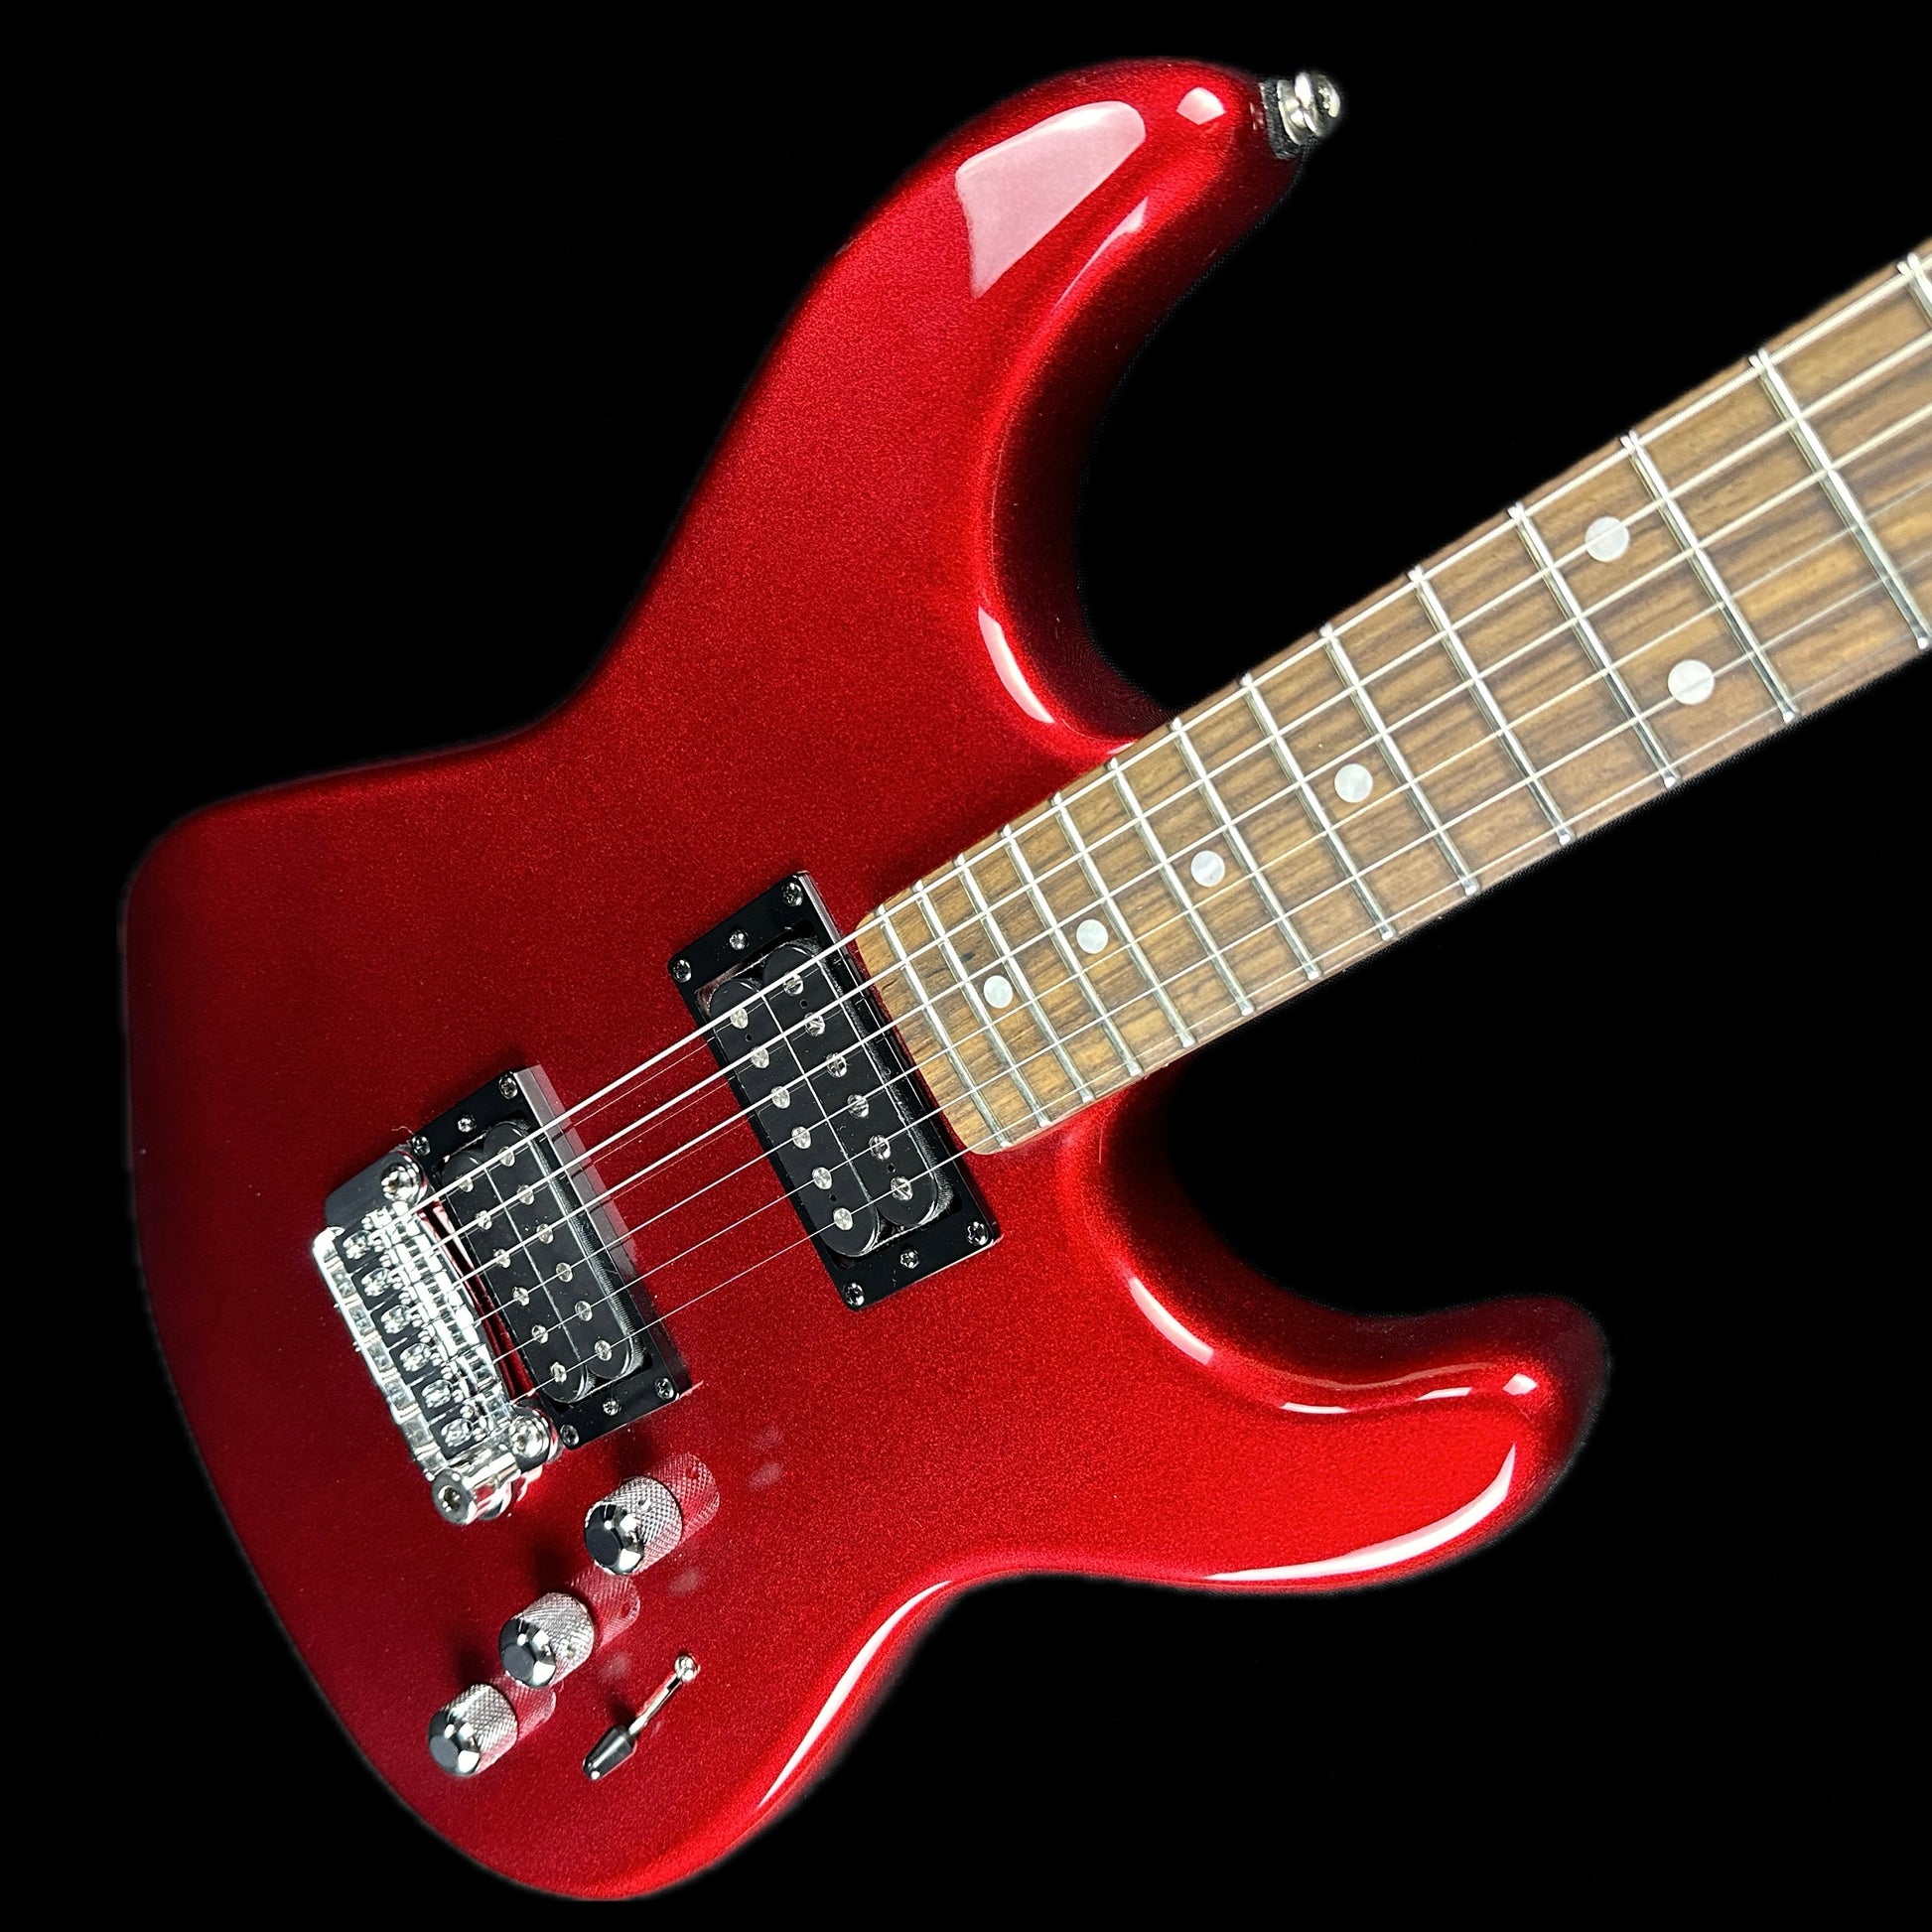 Front angle of G&L USA Legacy HH RMC Empress Candy Apple Red Metallic Matching Headstock.